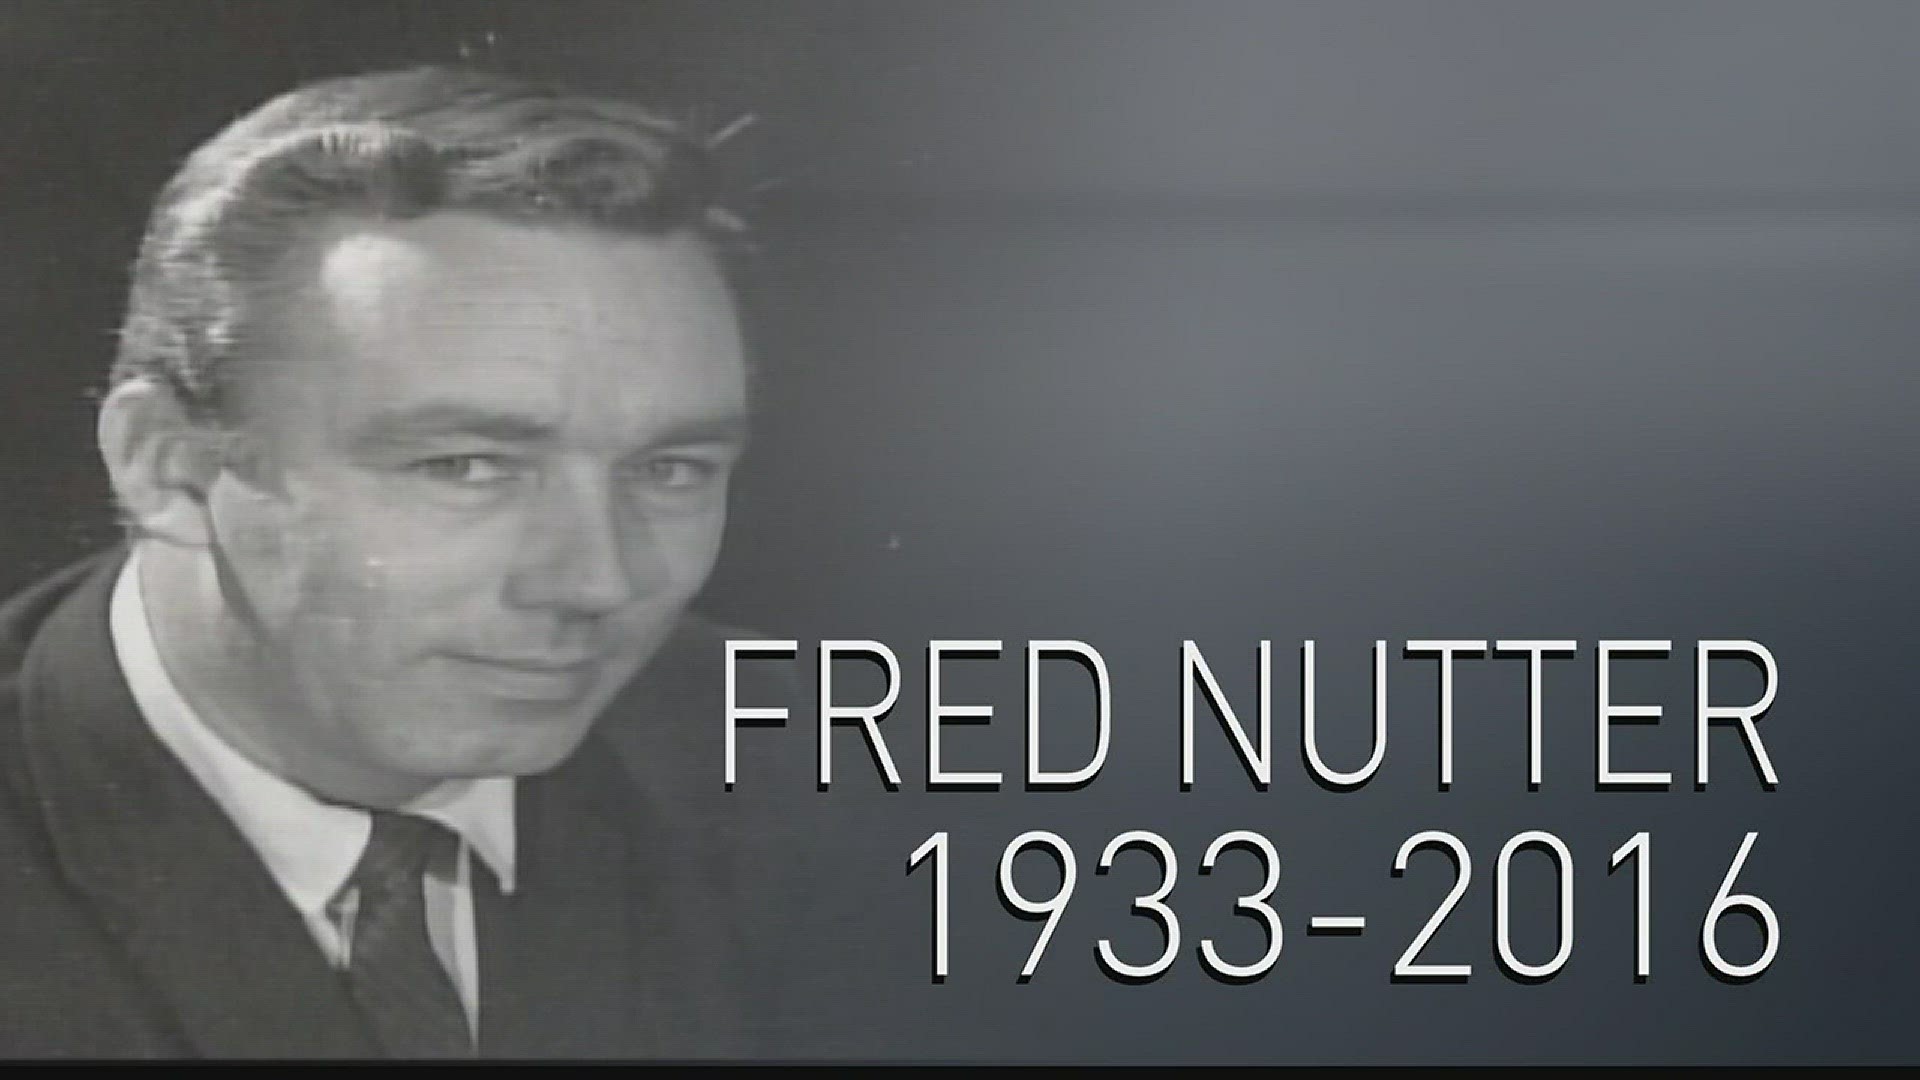 Tribute to NEWS CENTER's Fred Nutter.